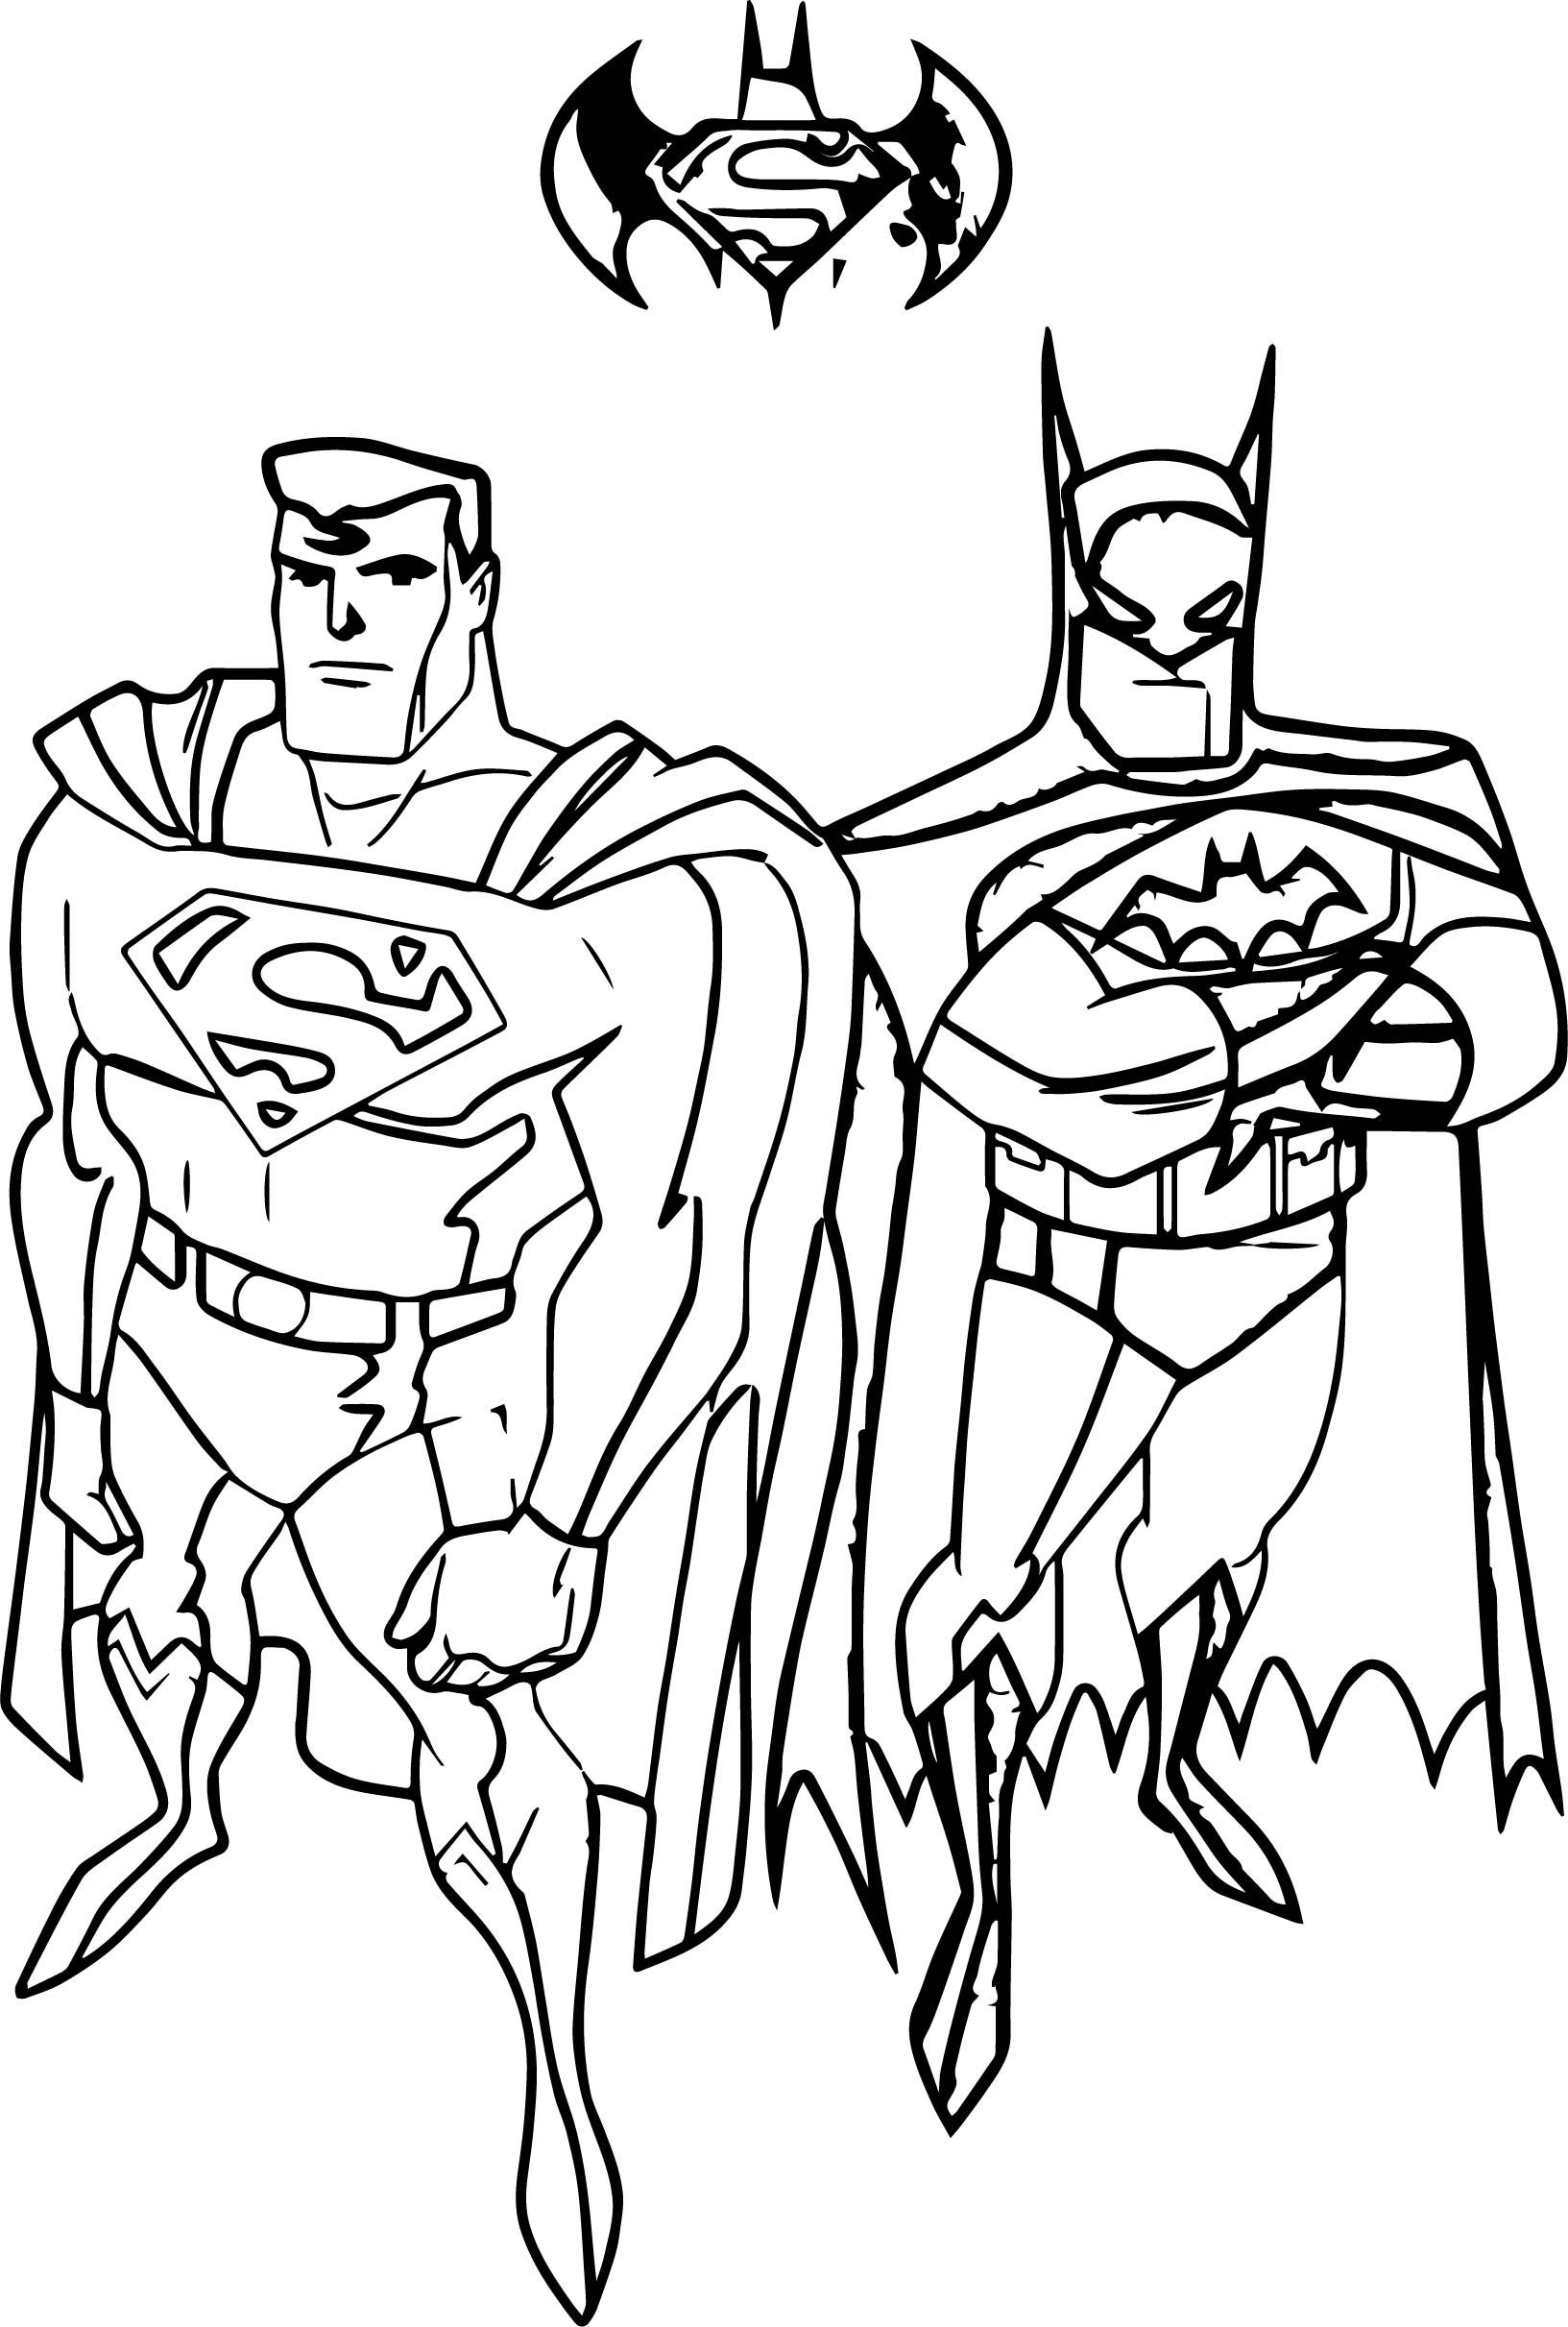 Superman Christmas Coloring Pages Coloring Pages Coloring Pages Incredible Batman Vs Superman Image